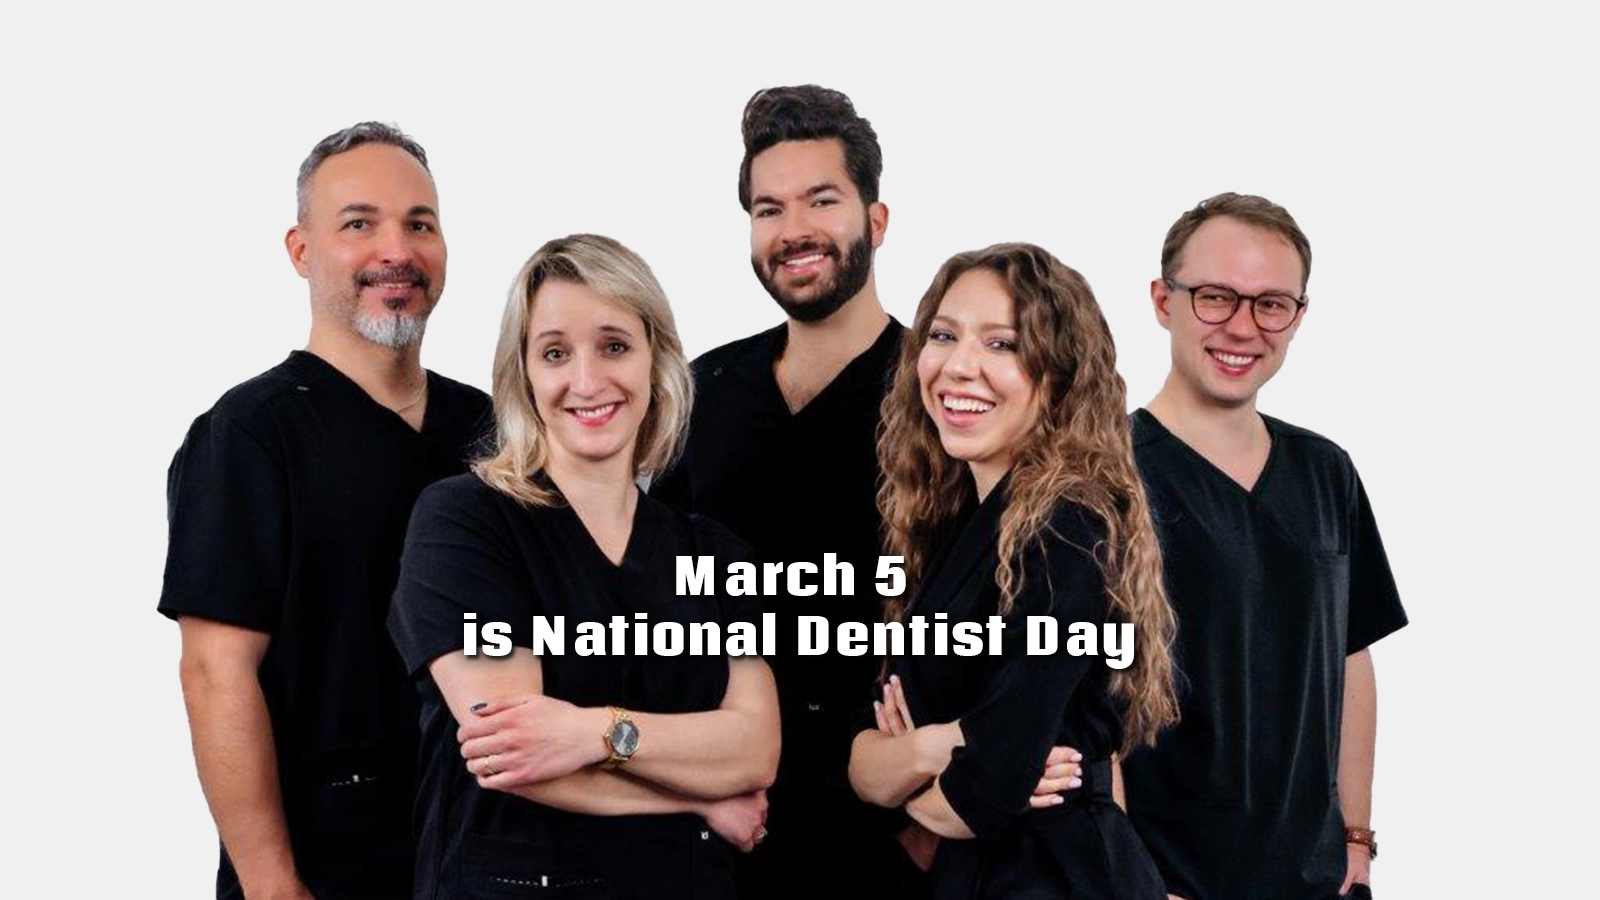 March 5 is National Dentist Day